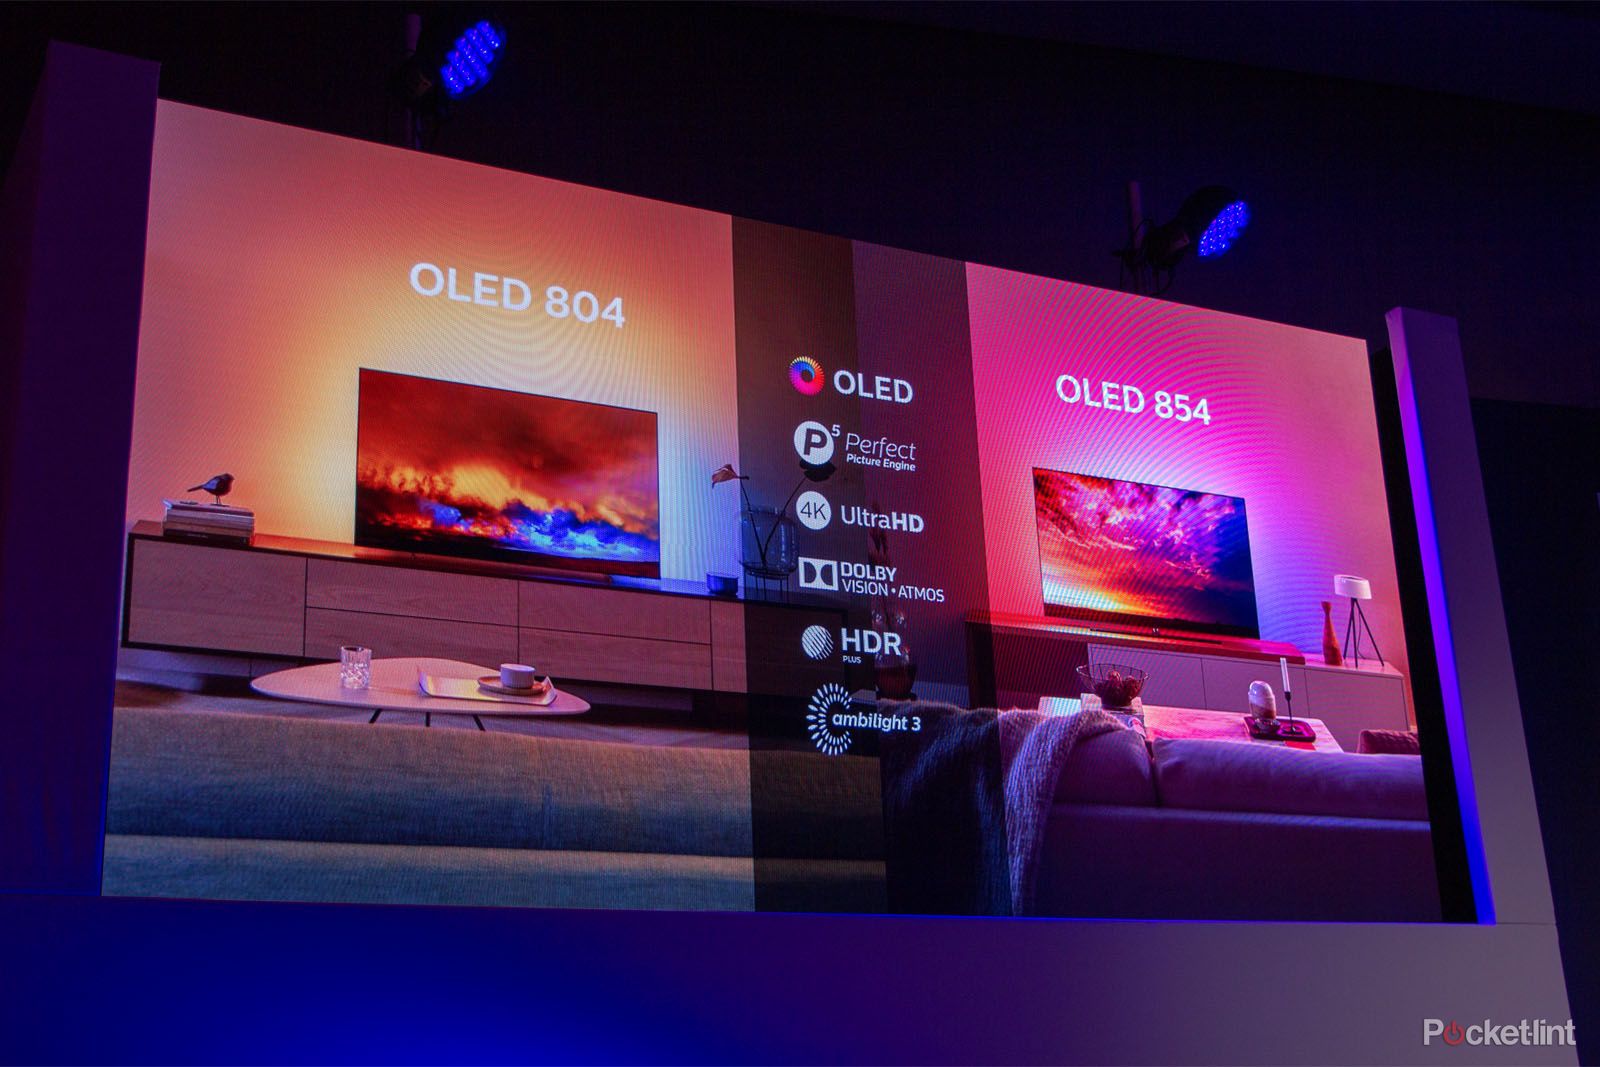 Philips announces OLED 804 and OLED 854 models for 2019 image 1